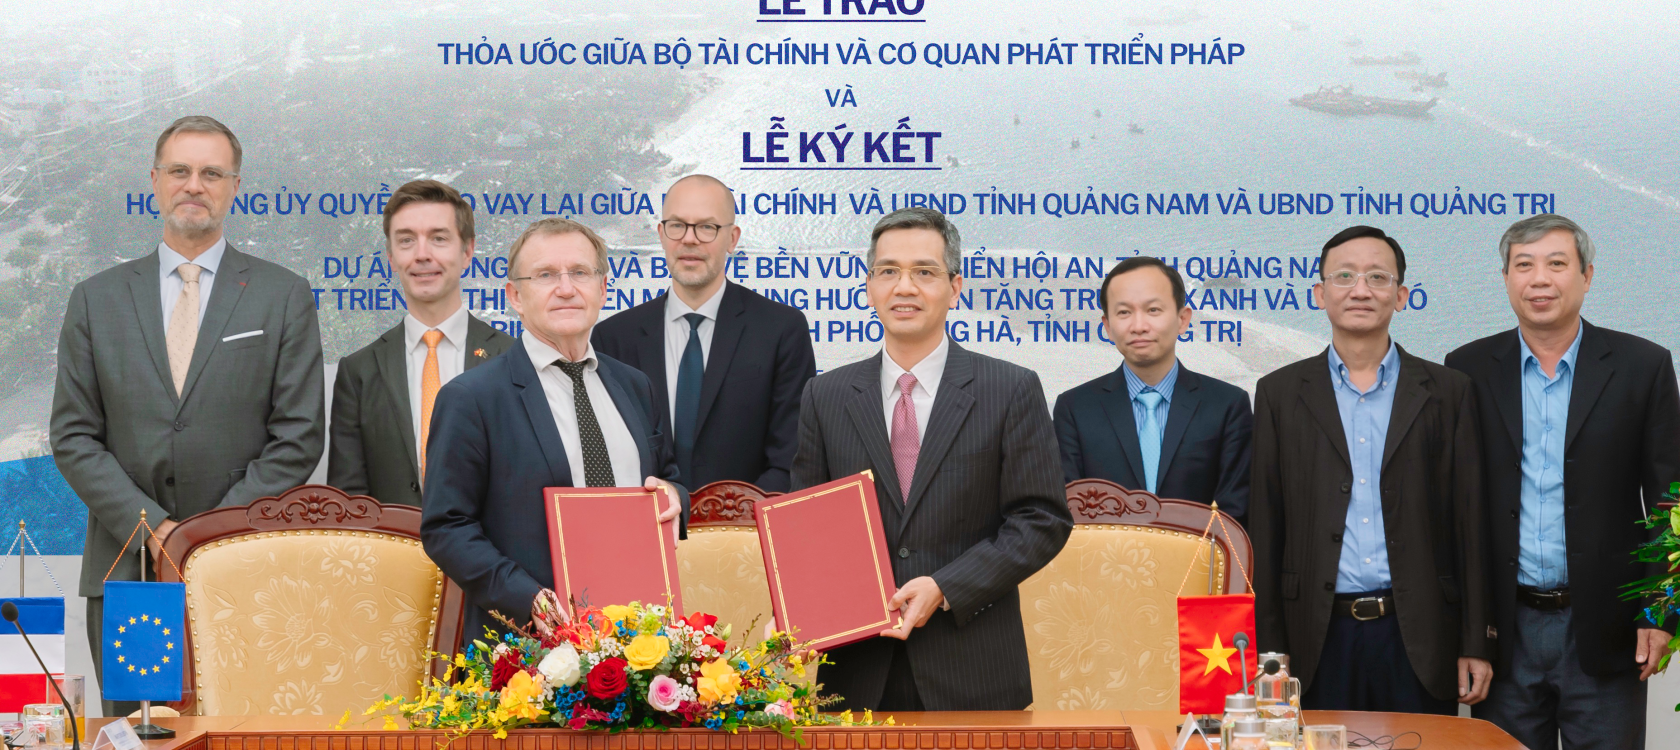 eu and france provide 785 million for quang nam and quang tri to tackle climate change